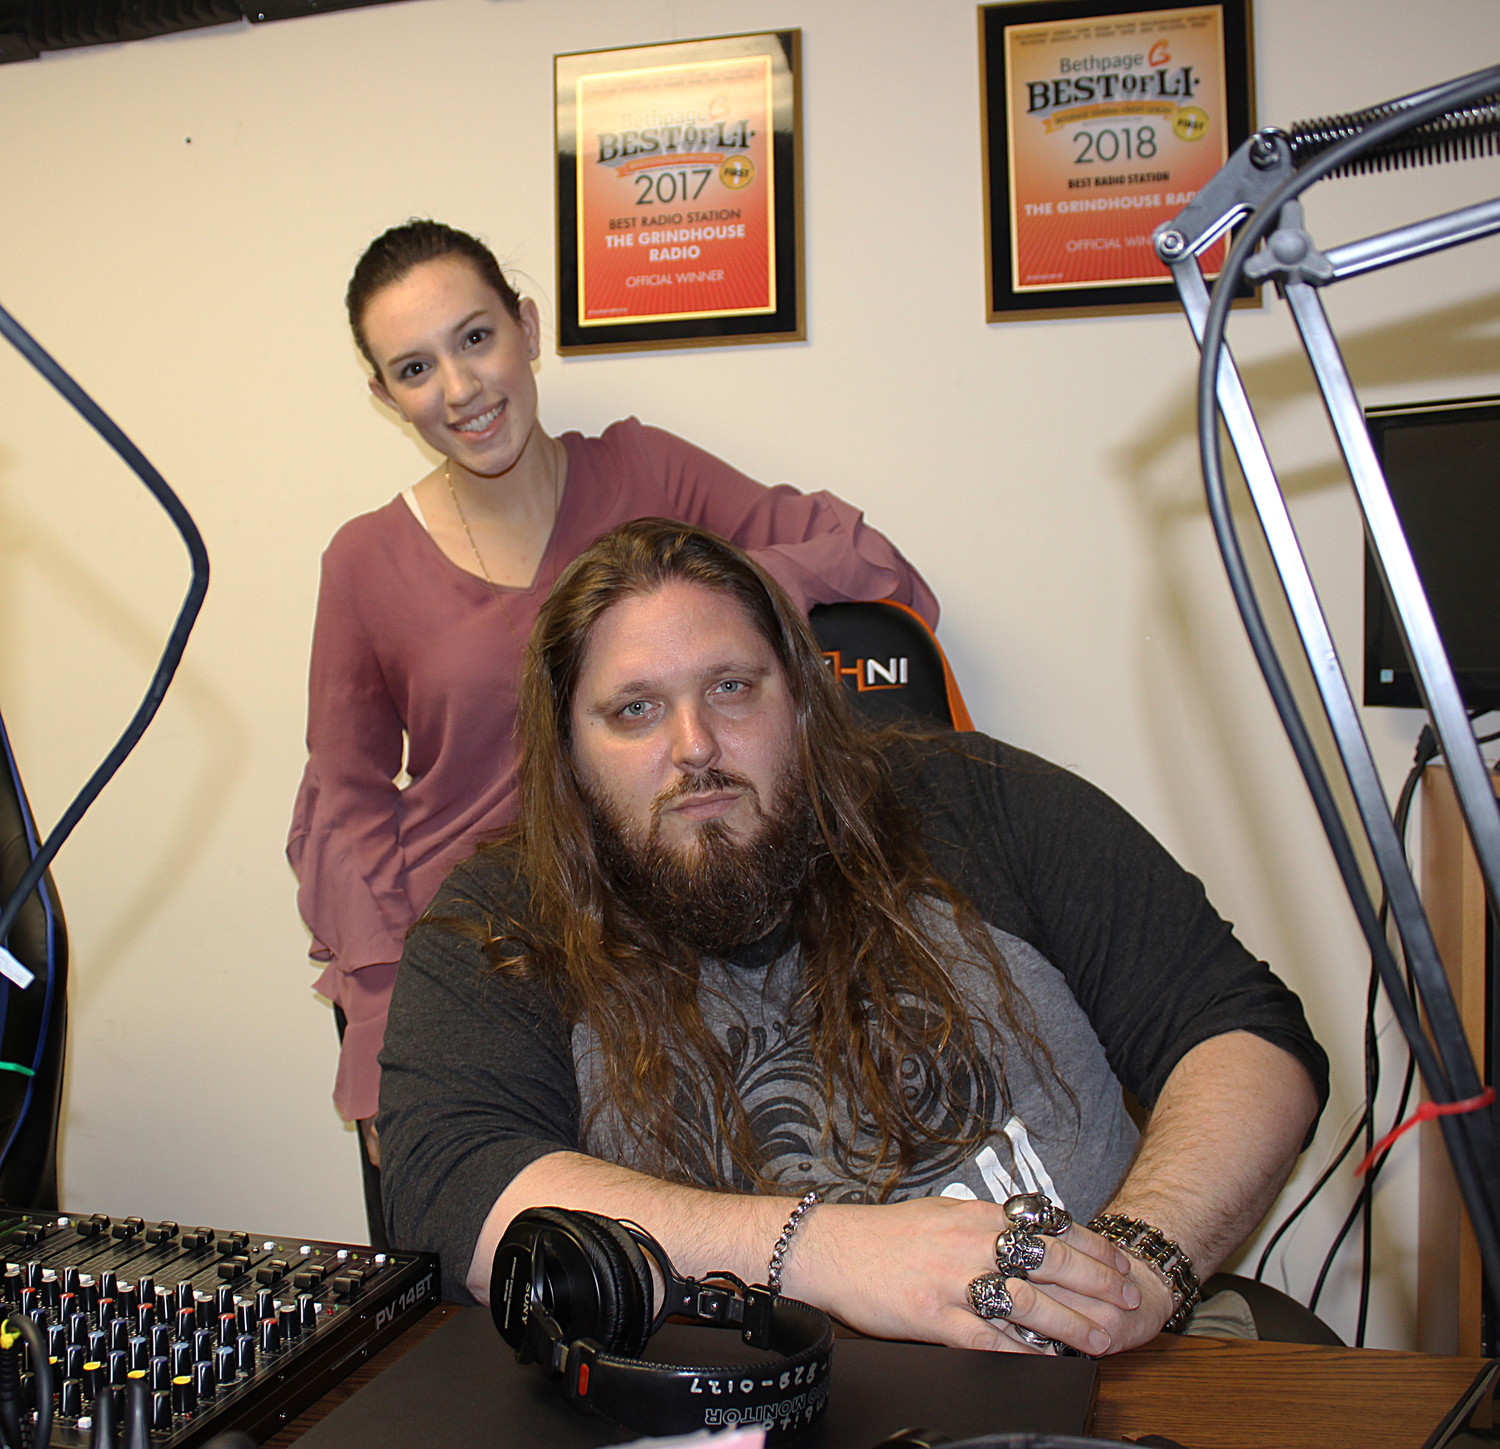 The Grindhouse Radio is a contender in SCORE’s American Small Business Championship. Kim Adragna, 23, of Merrick and William “Brimstone” Kucmierowski, 43, recently spoke to the Herald about the contest.